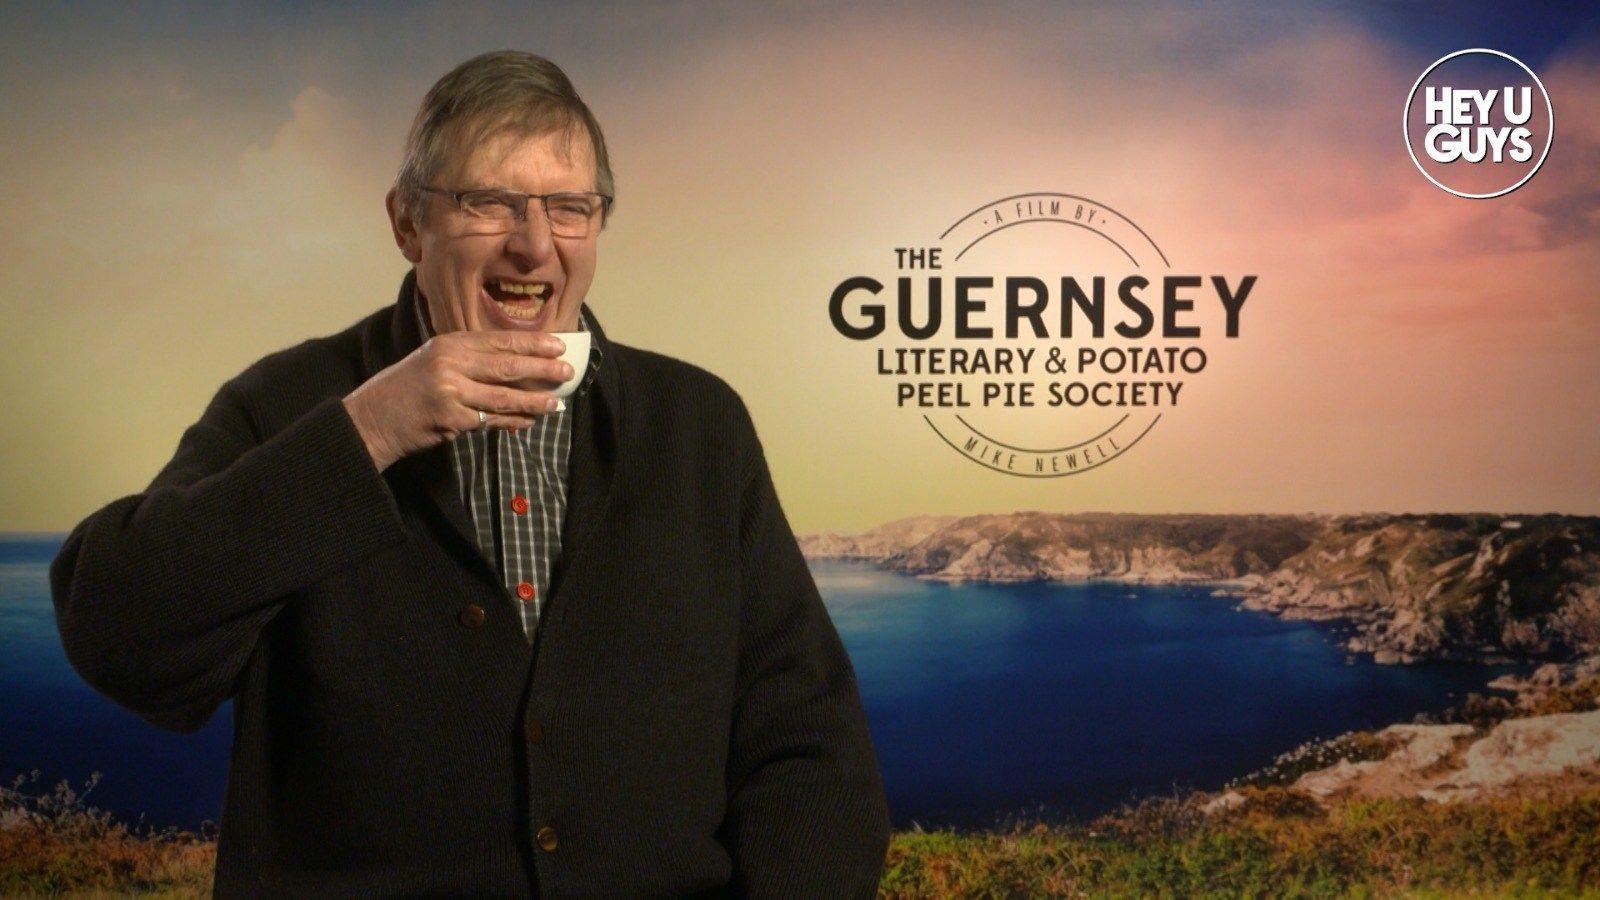 Mike Newell on The Guernsey Literary & Potato Peel Pie Society